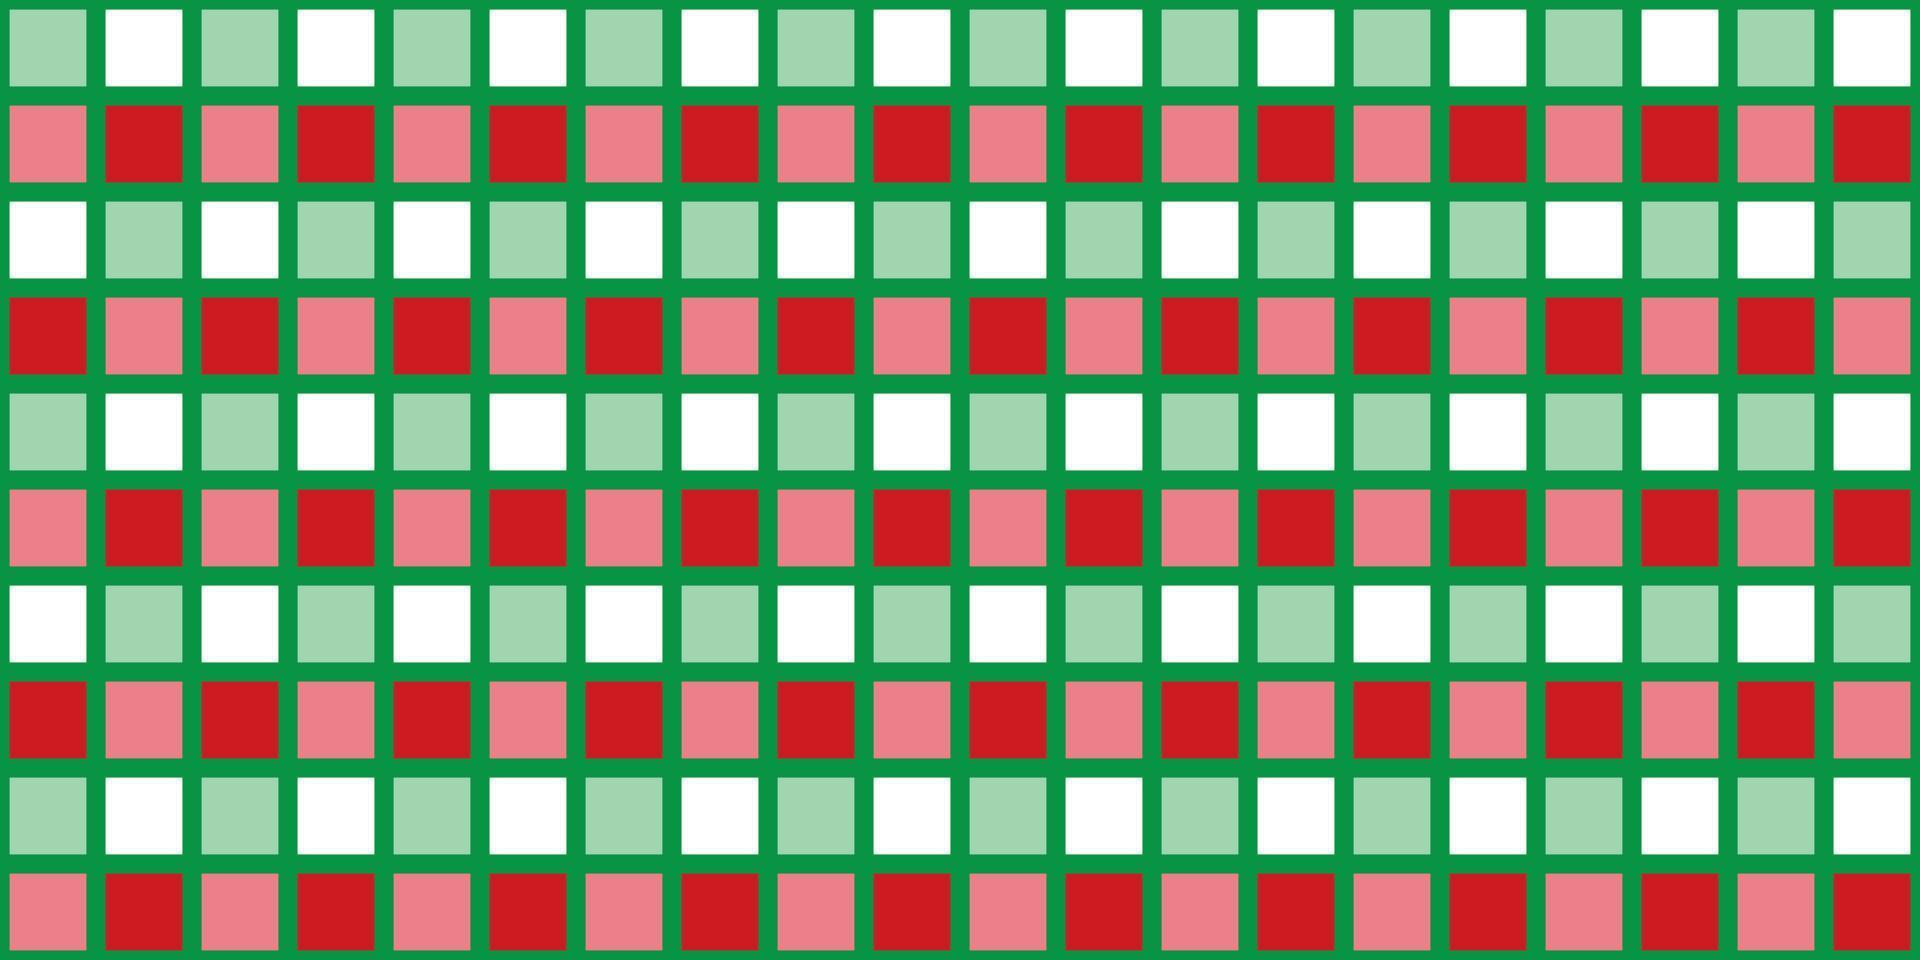 Christmas background with red and green on white colour, block pattern. Vector illustration.